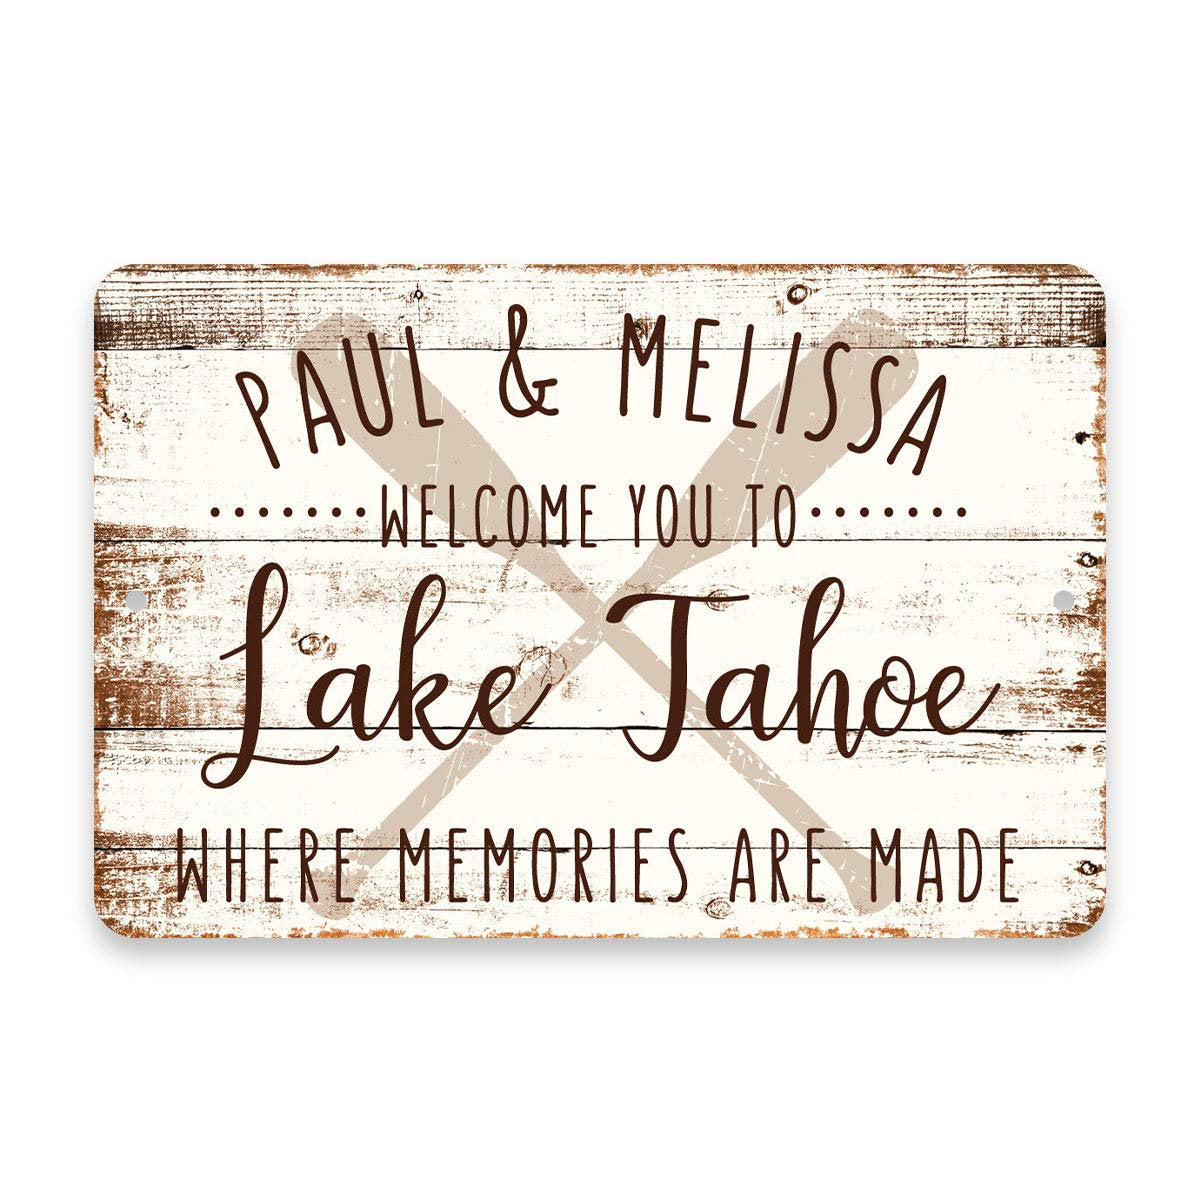 Personalized Welcome to Lake Tahoe Where Memories are Made Sign - 8 X 12 Metal Sign with Wood Look